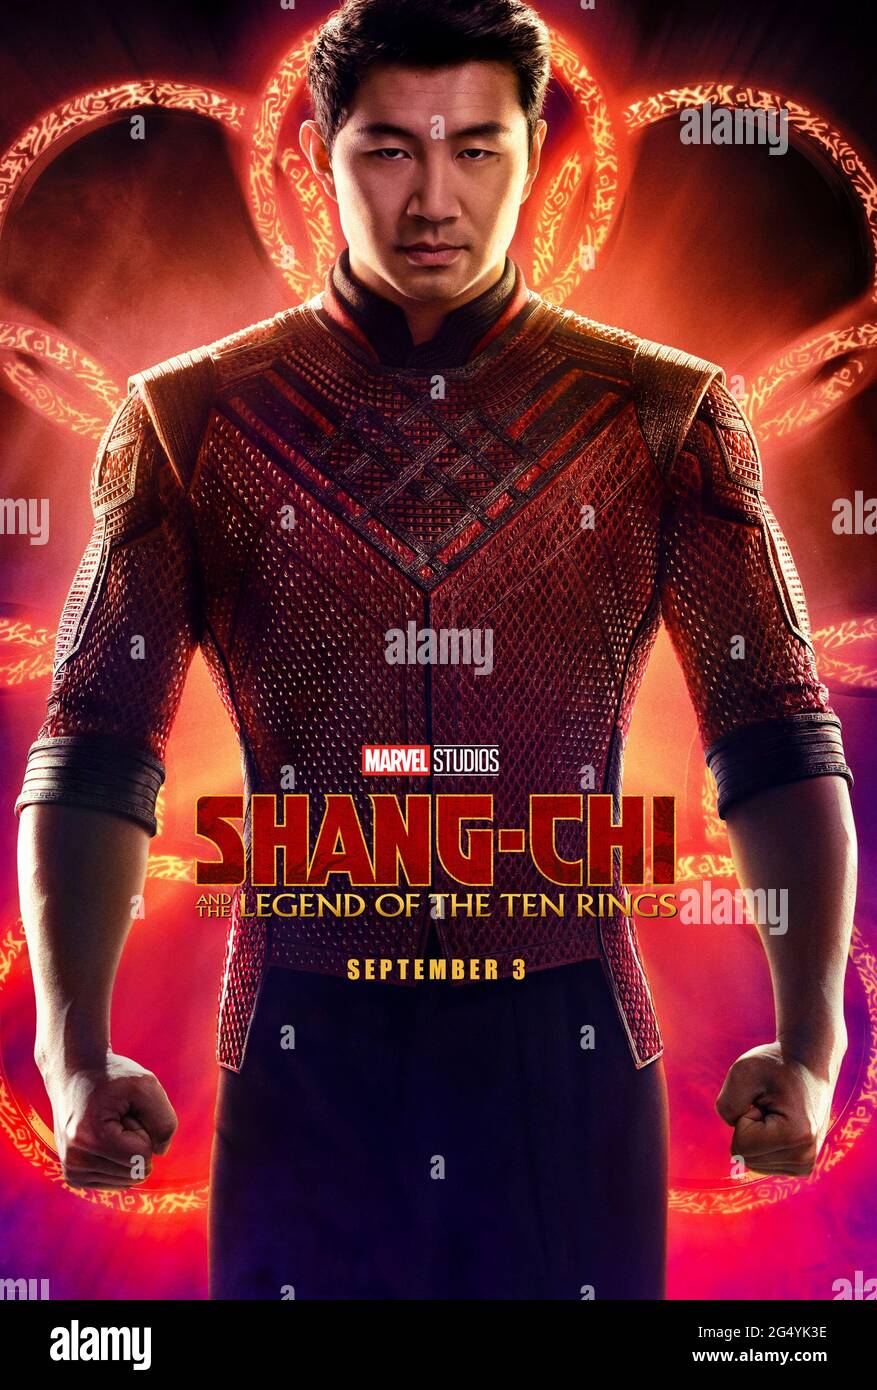 Shang-Chi and the Legend of the Ten Rings B8(2021) directed by Destin Daniel Cretton and starring Simu Liu, Awkwafina and Tony Chiu-Wai Leung. Big screen outing for Marvel Comics superhero Shang-Chi, the Master of Kung Fu. Stock Photo